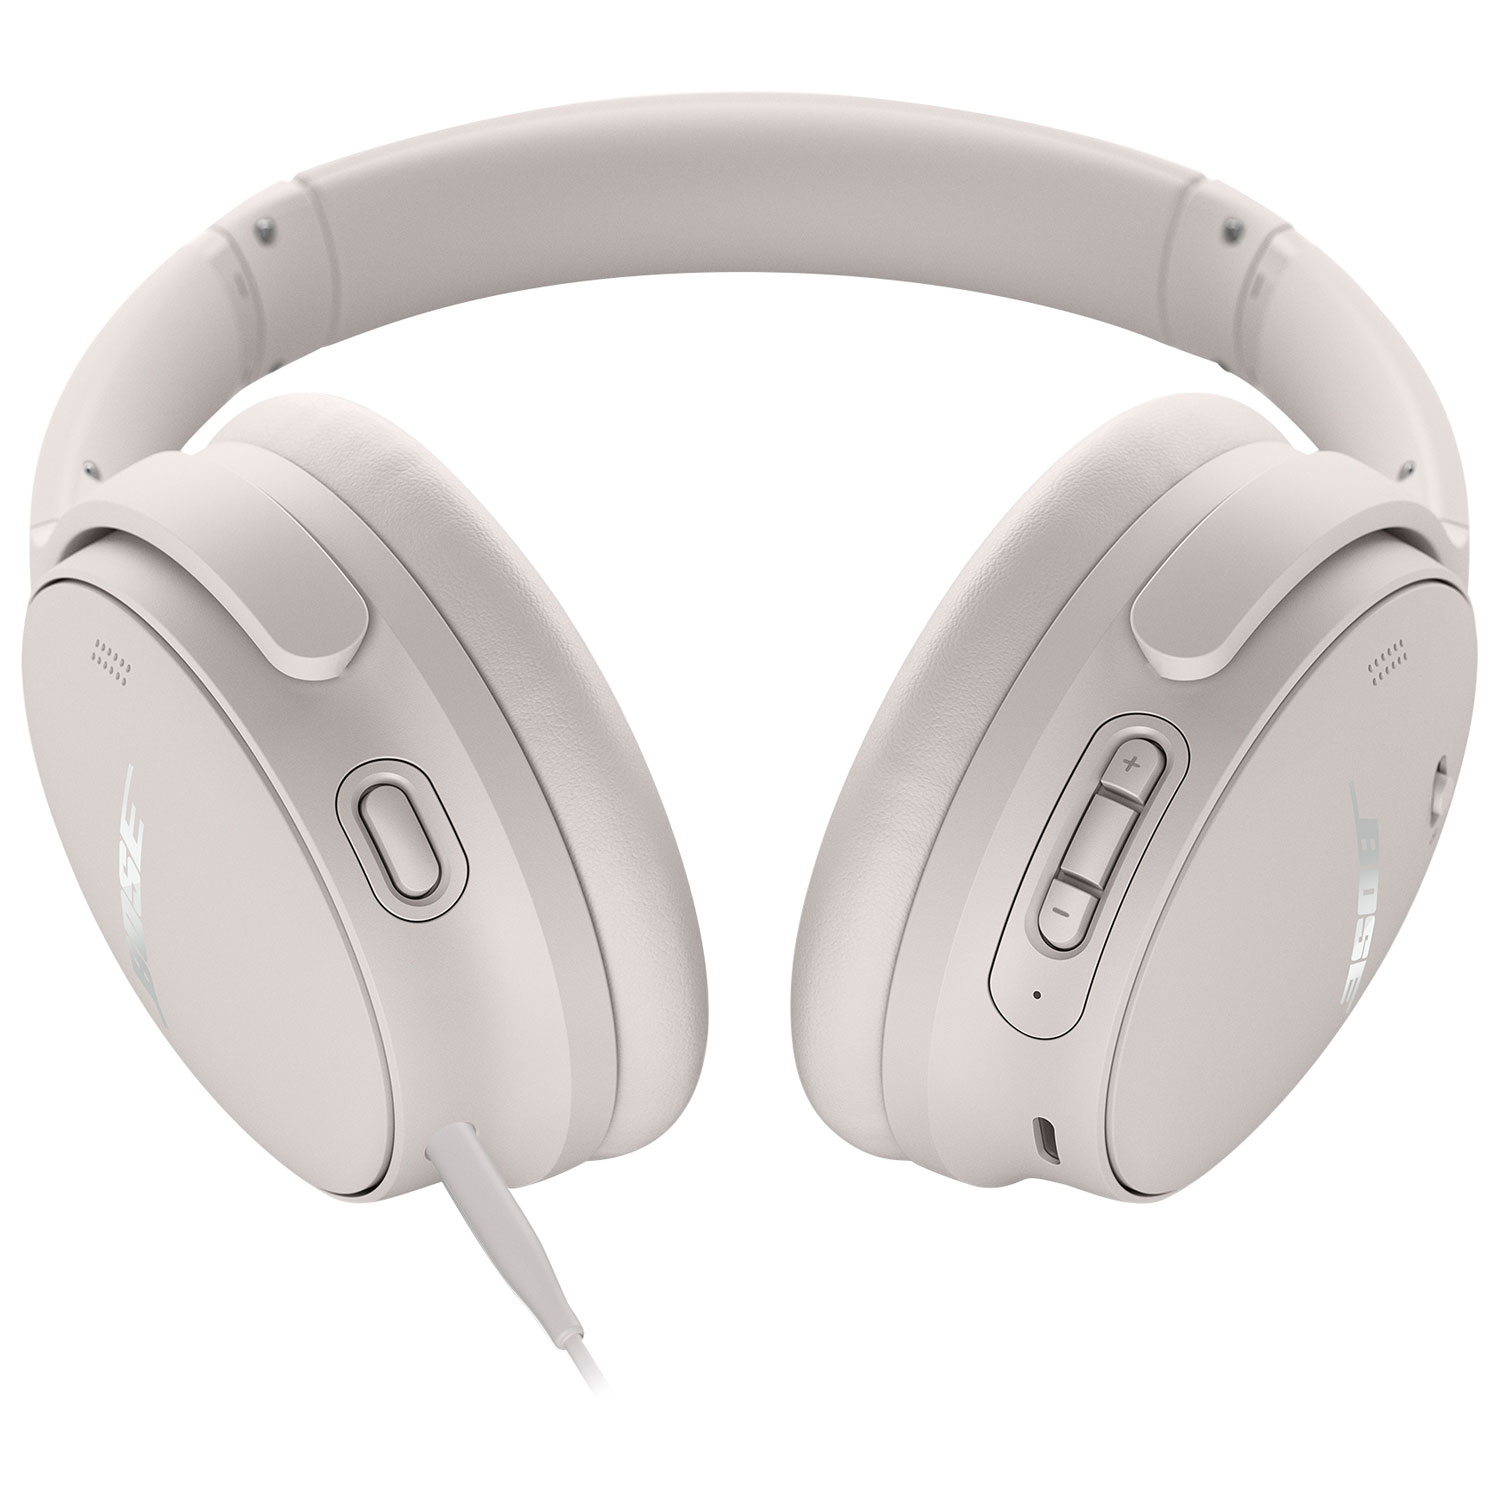 Bose QuietComfort Over-Ear Noise Cancelling Bluetooth Headphones - White  Smoke